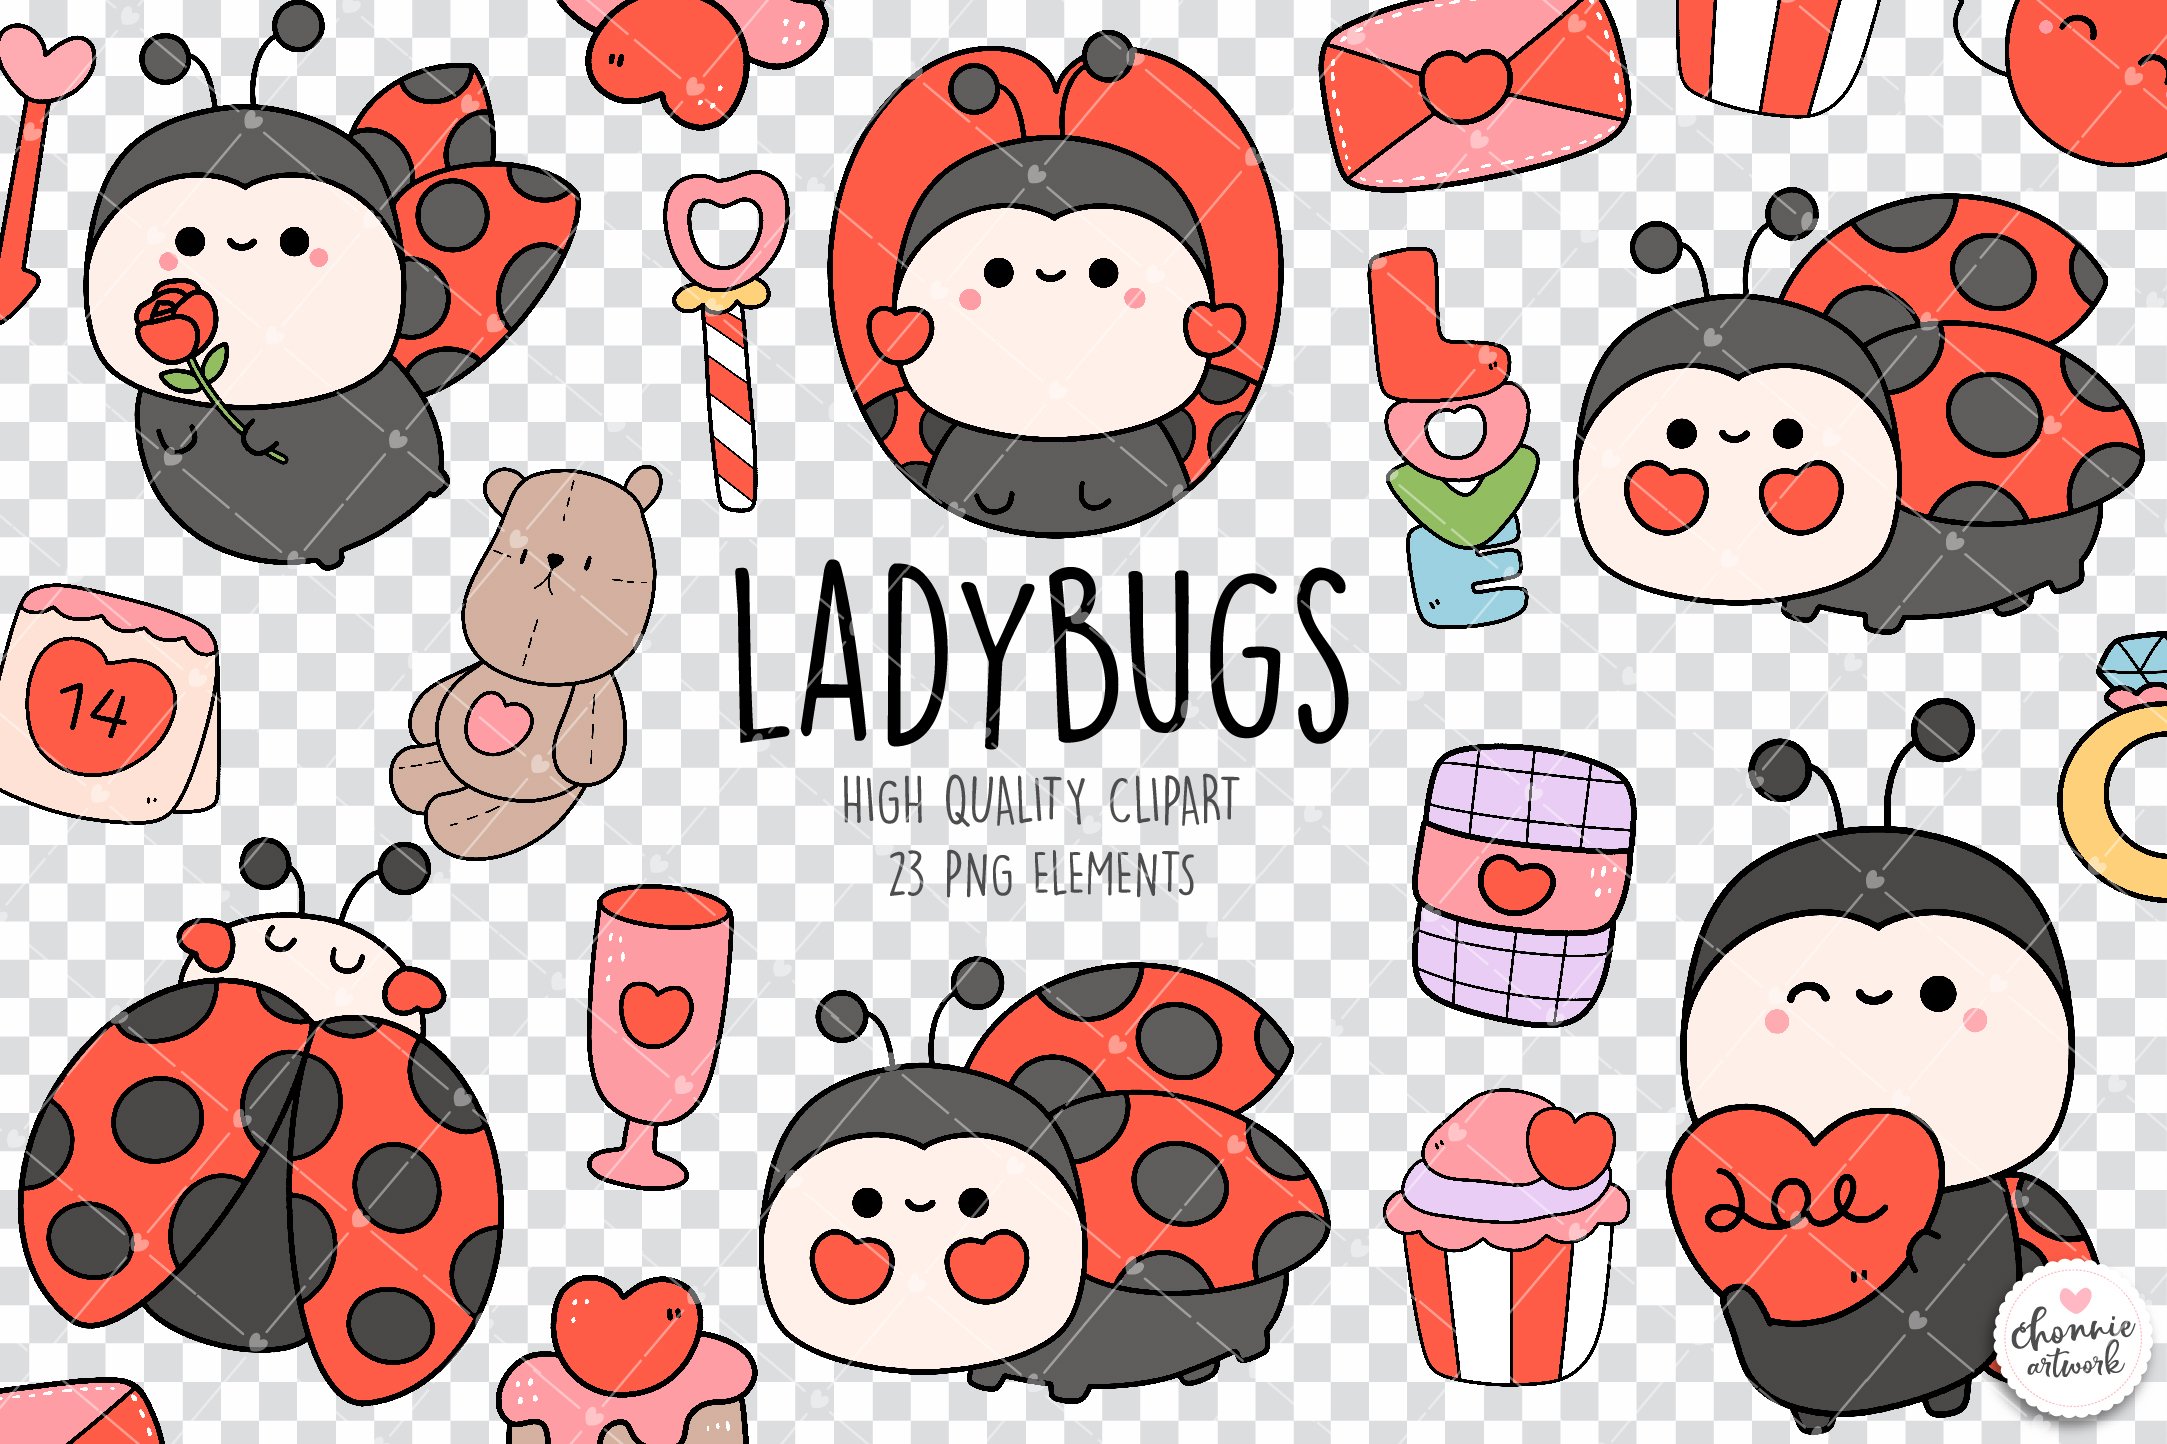 Valentine's day ladybug clipart preview image.